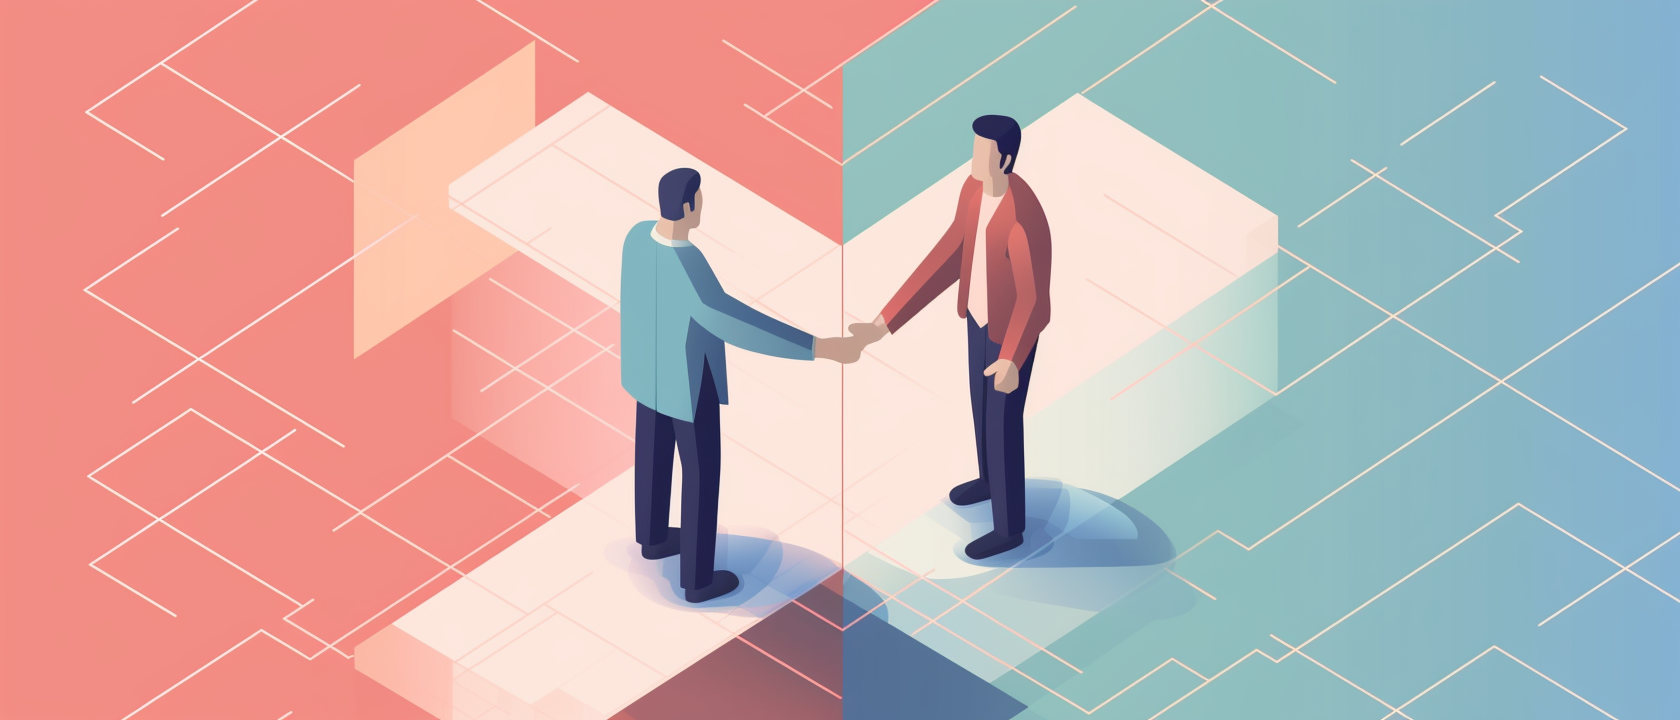 Illustration of two people standing and shaking hands